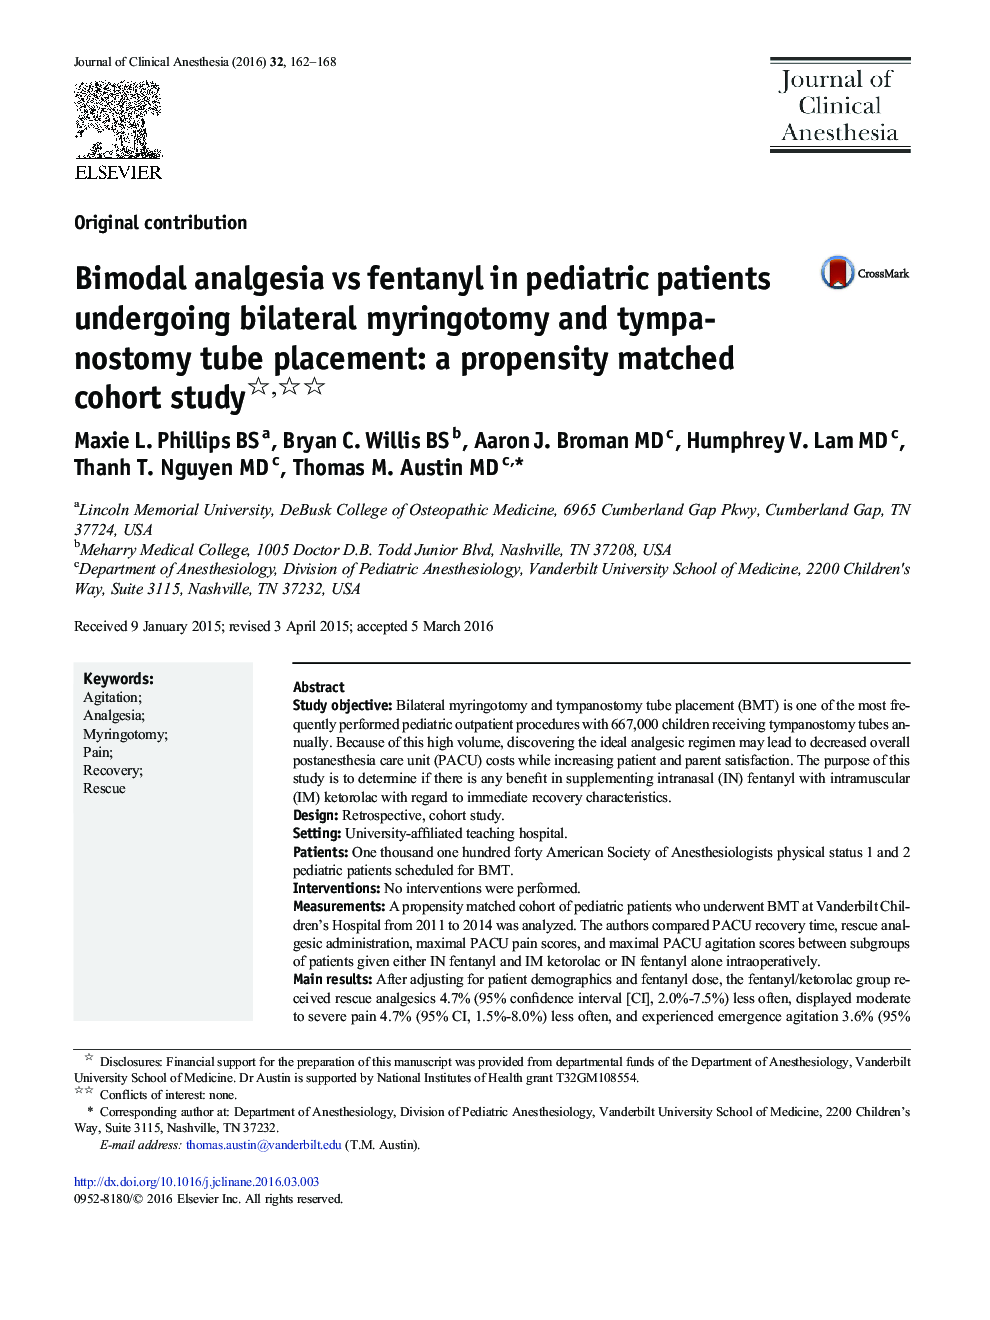 Bimodal analgesia vs fentanyl in pediatric patients undergoing bilateral myringotomy and tympanostomy tube placement: a propensity matched cohort study